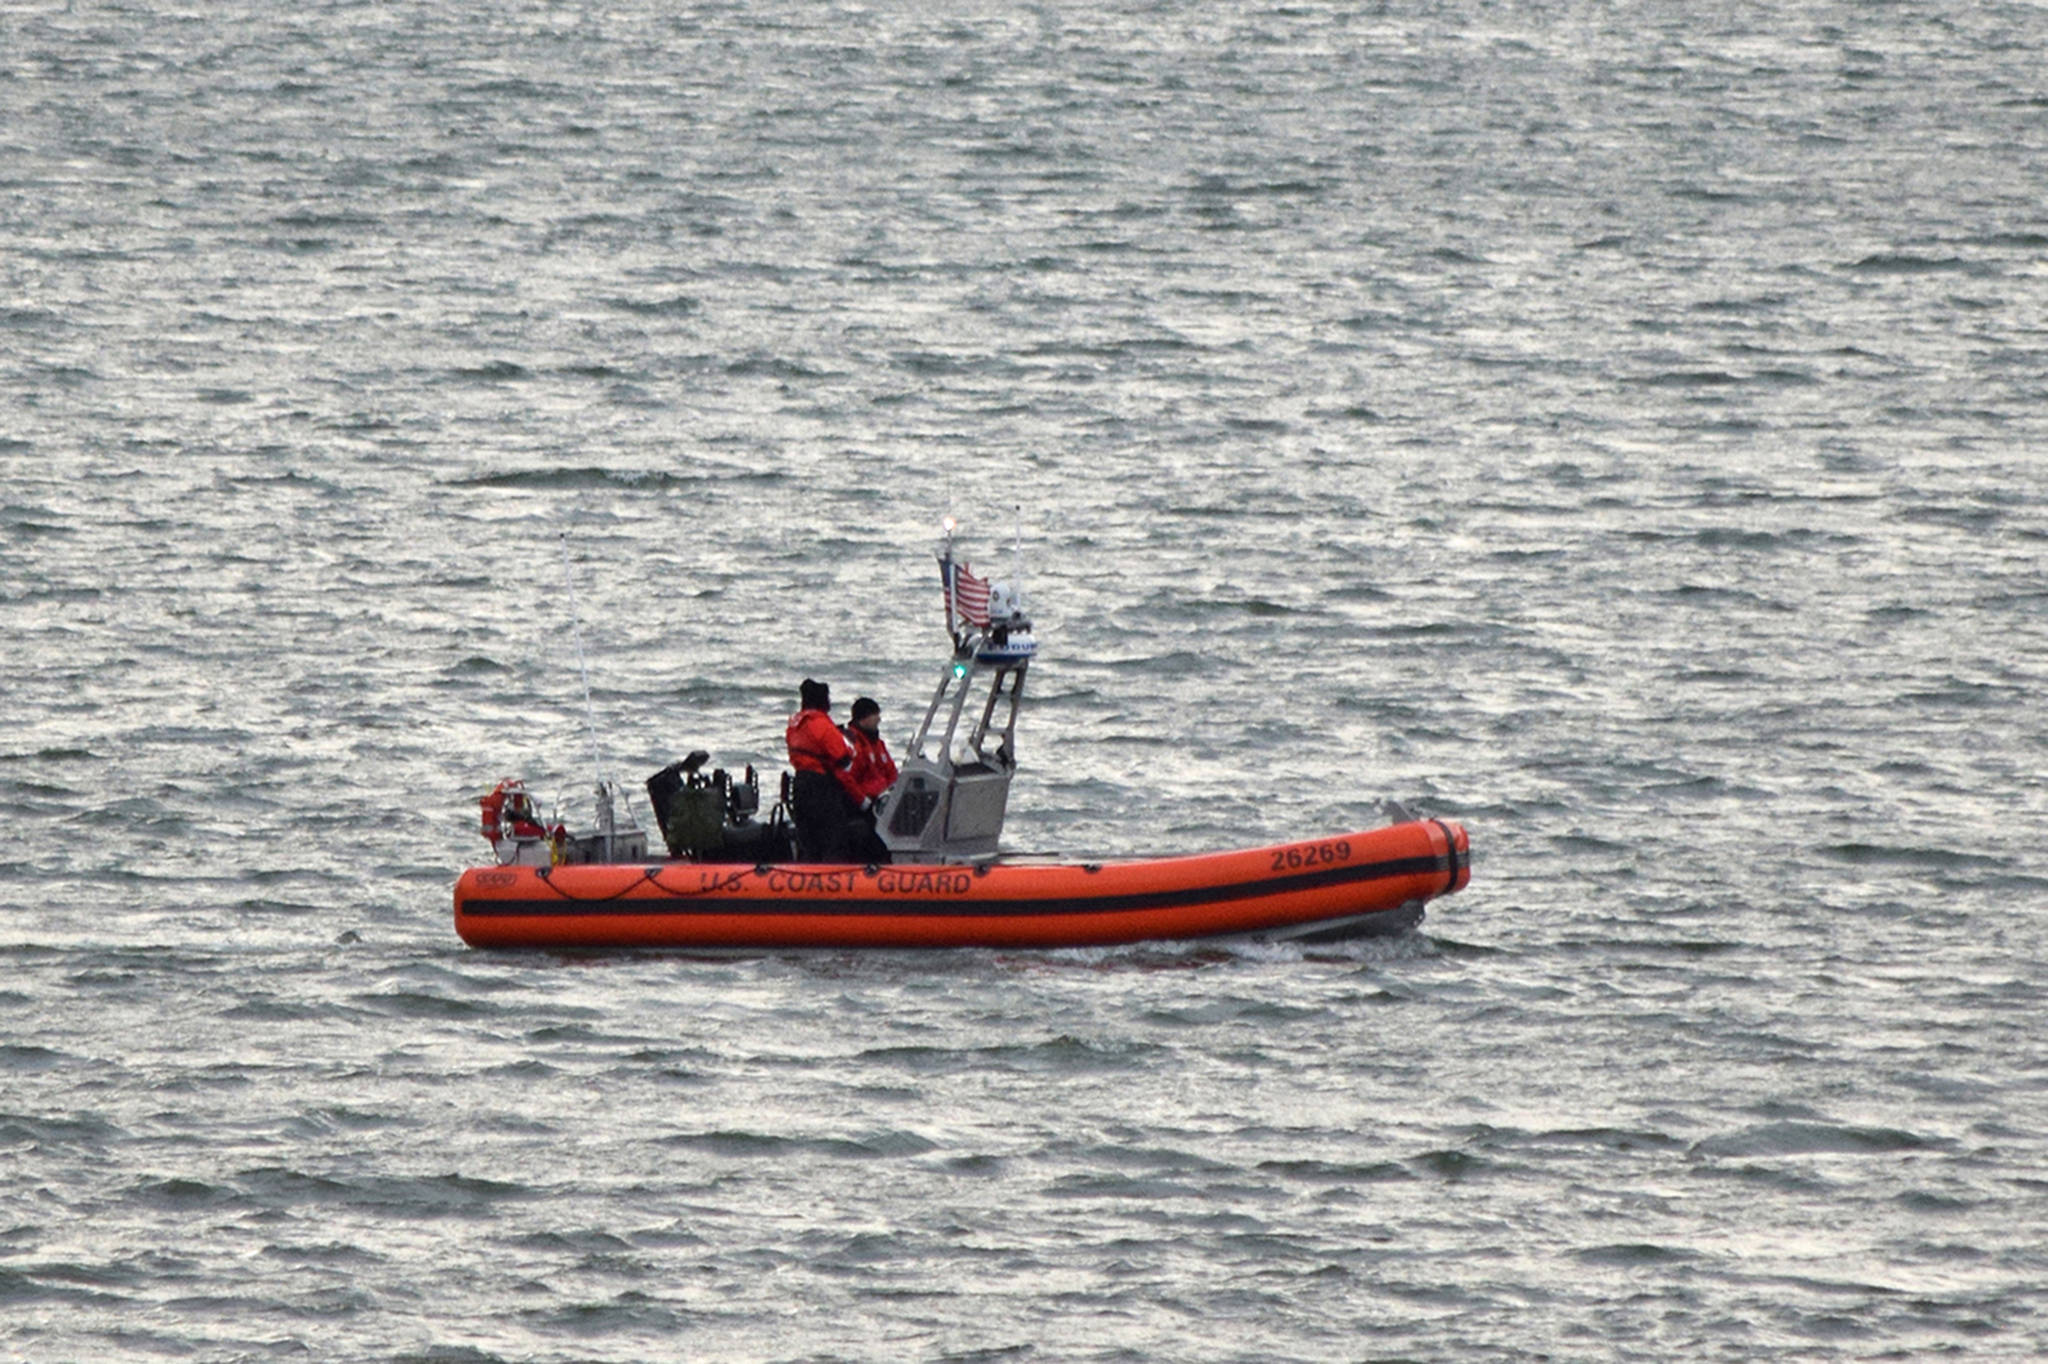 A Coast Guard boat searches Gastineau Channel for two missing boaters on Wednesday, Dec. 6, 2017. (Angelo Saggiomo | Juneau Empire)